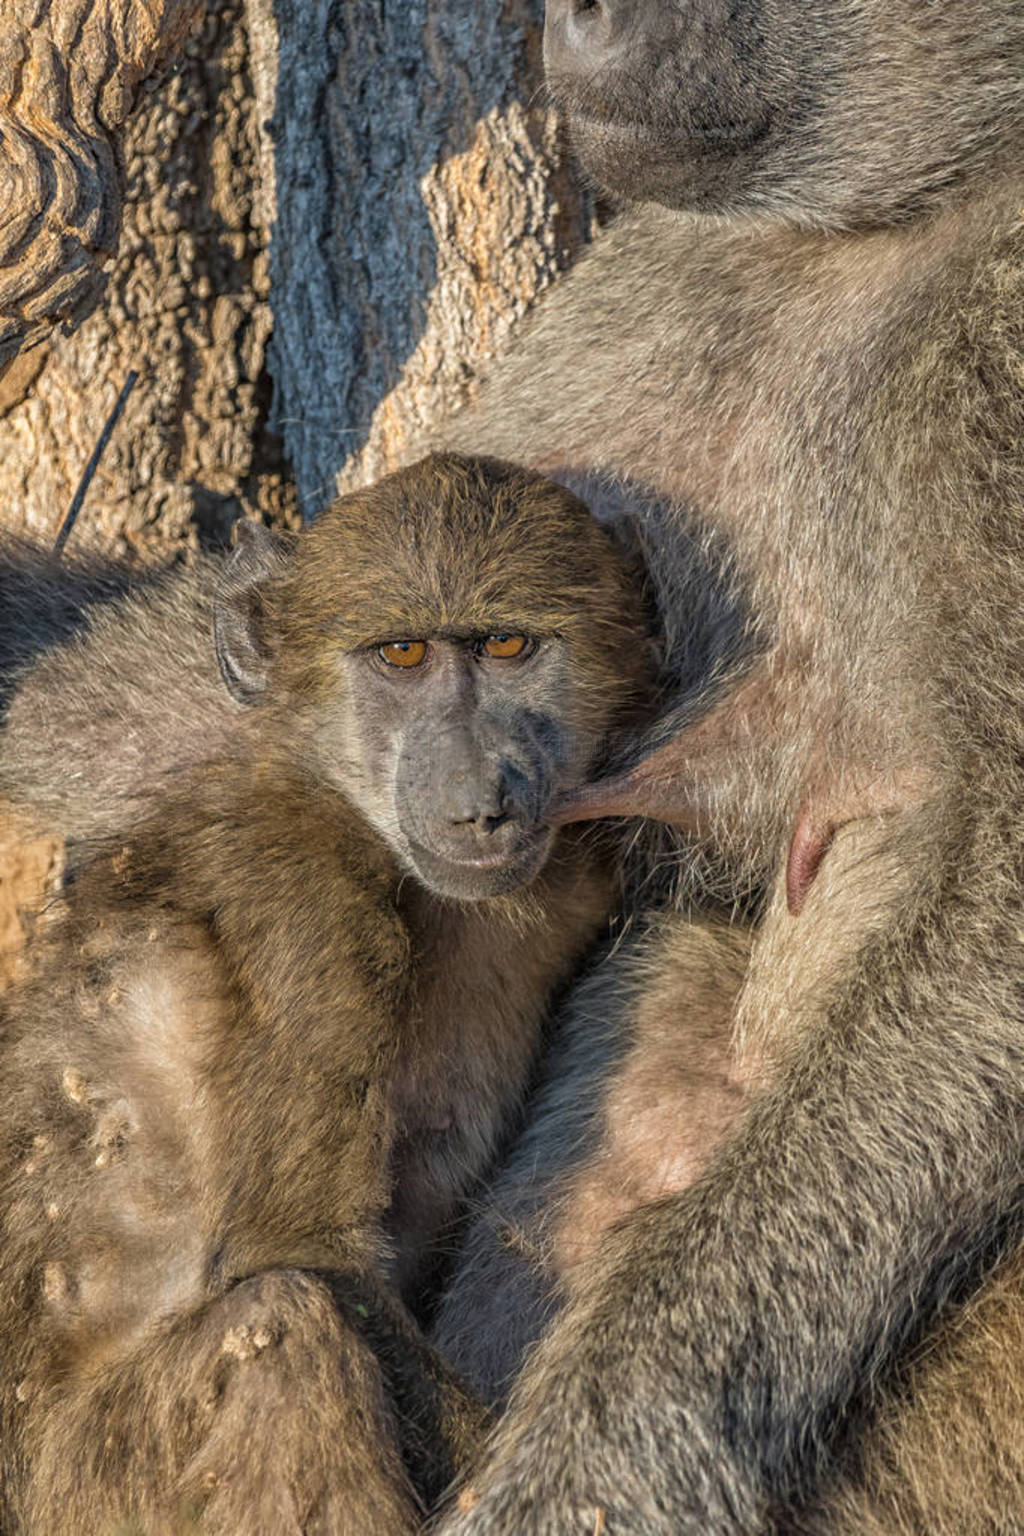 Young chacma baboon suckling on its sleeping mother